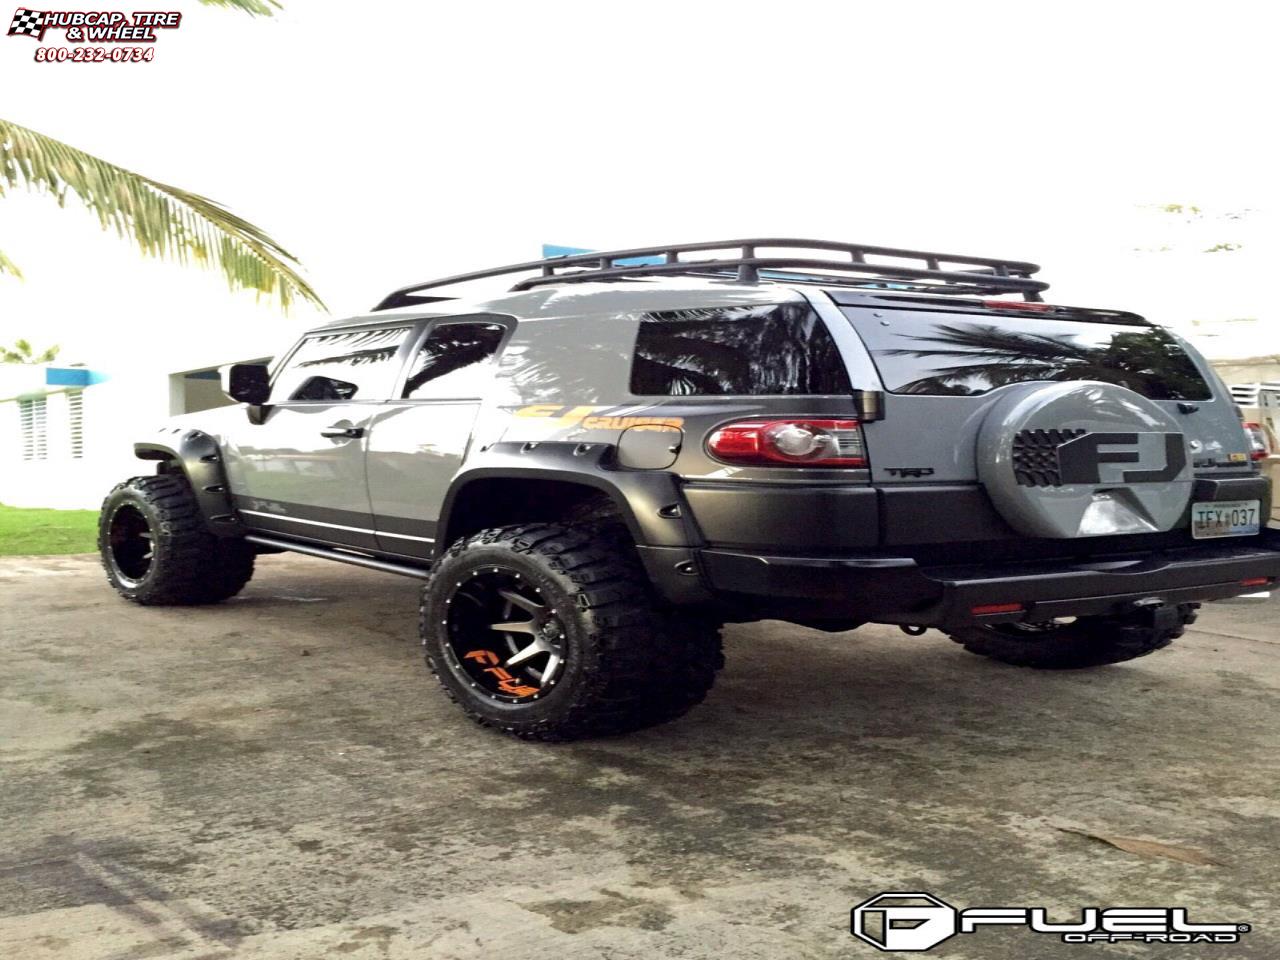 vehicle gallery/toyota fj cruiser fuel rampage d238 0X0  Anthracite center, gloss black lip wheels and rims